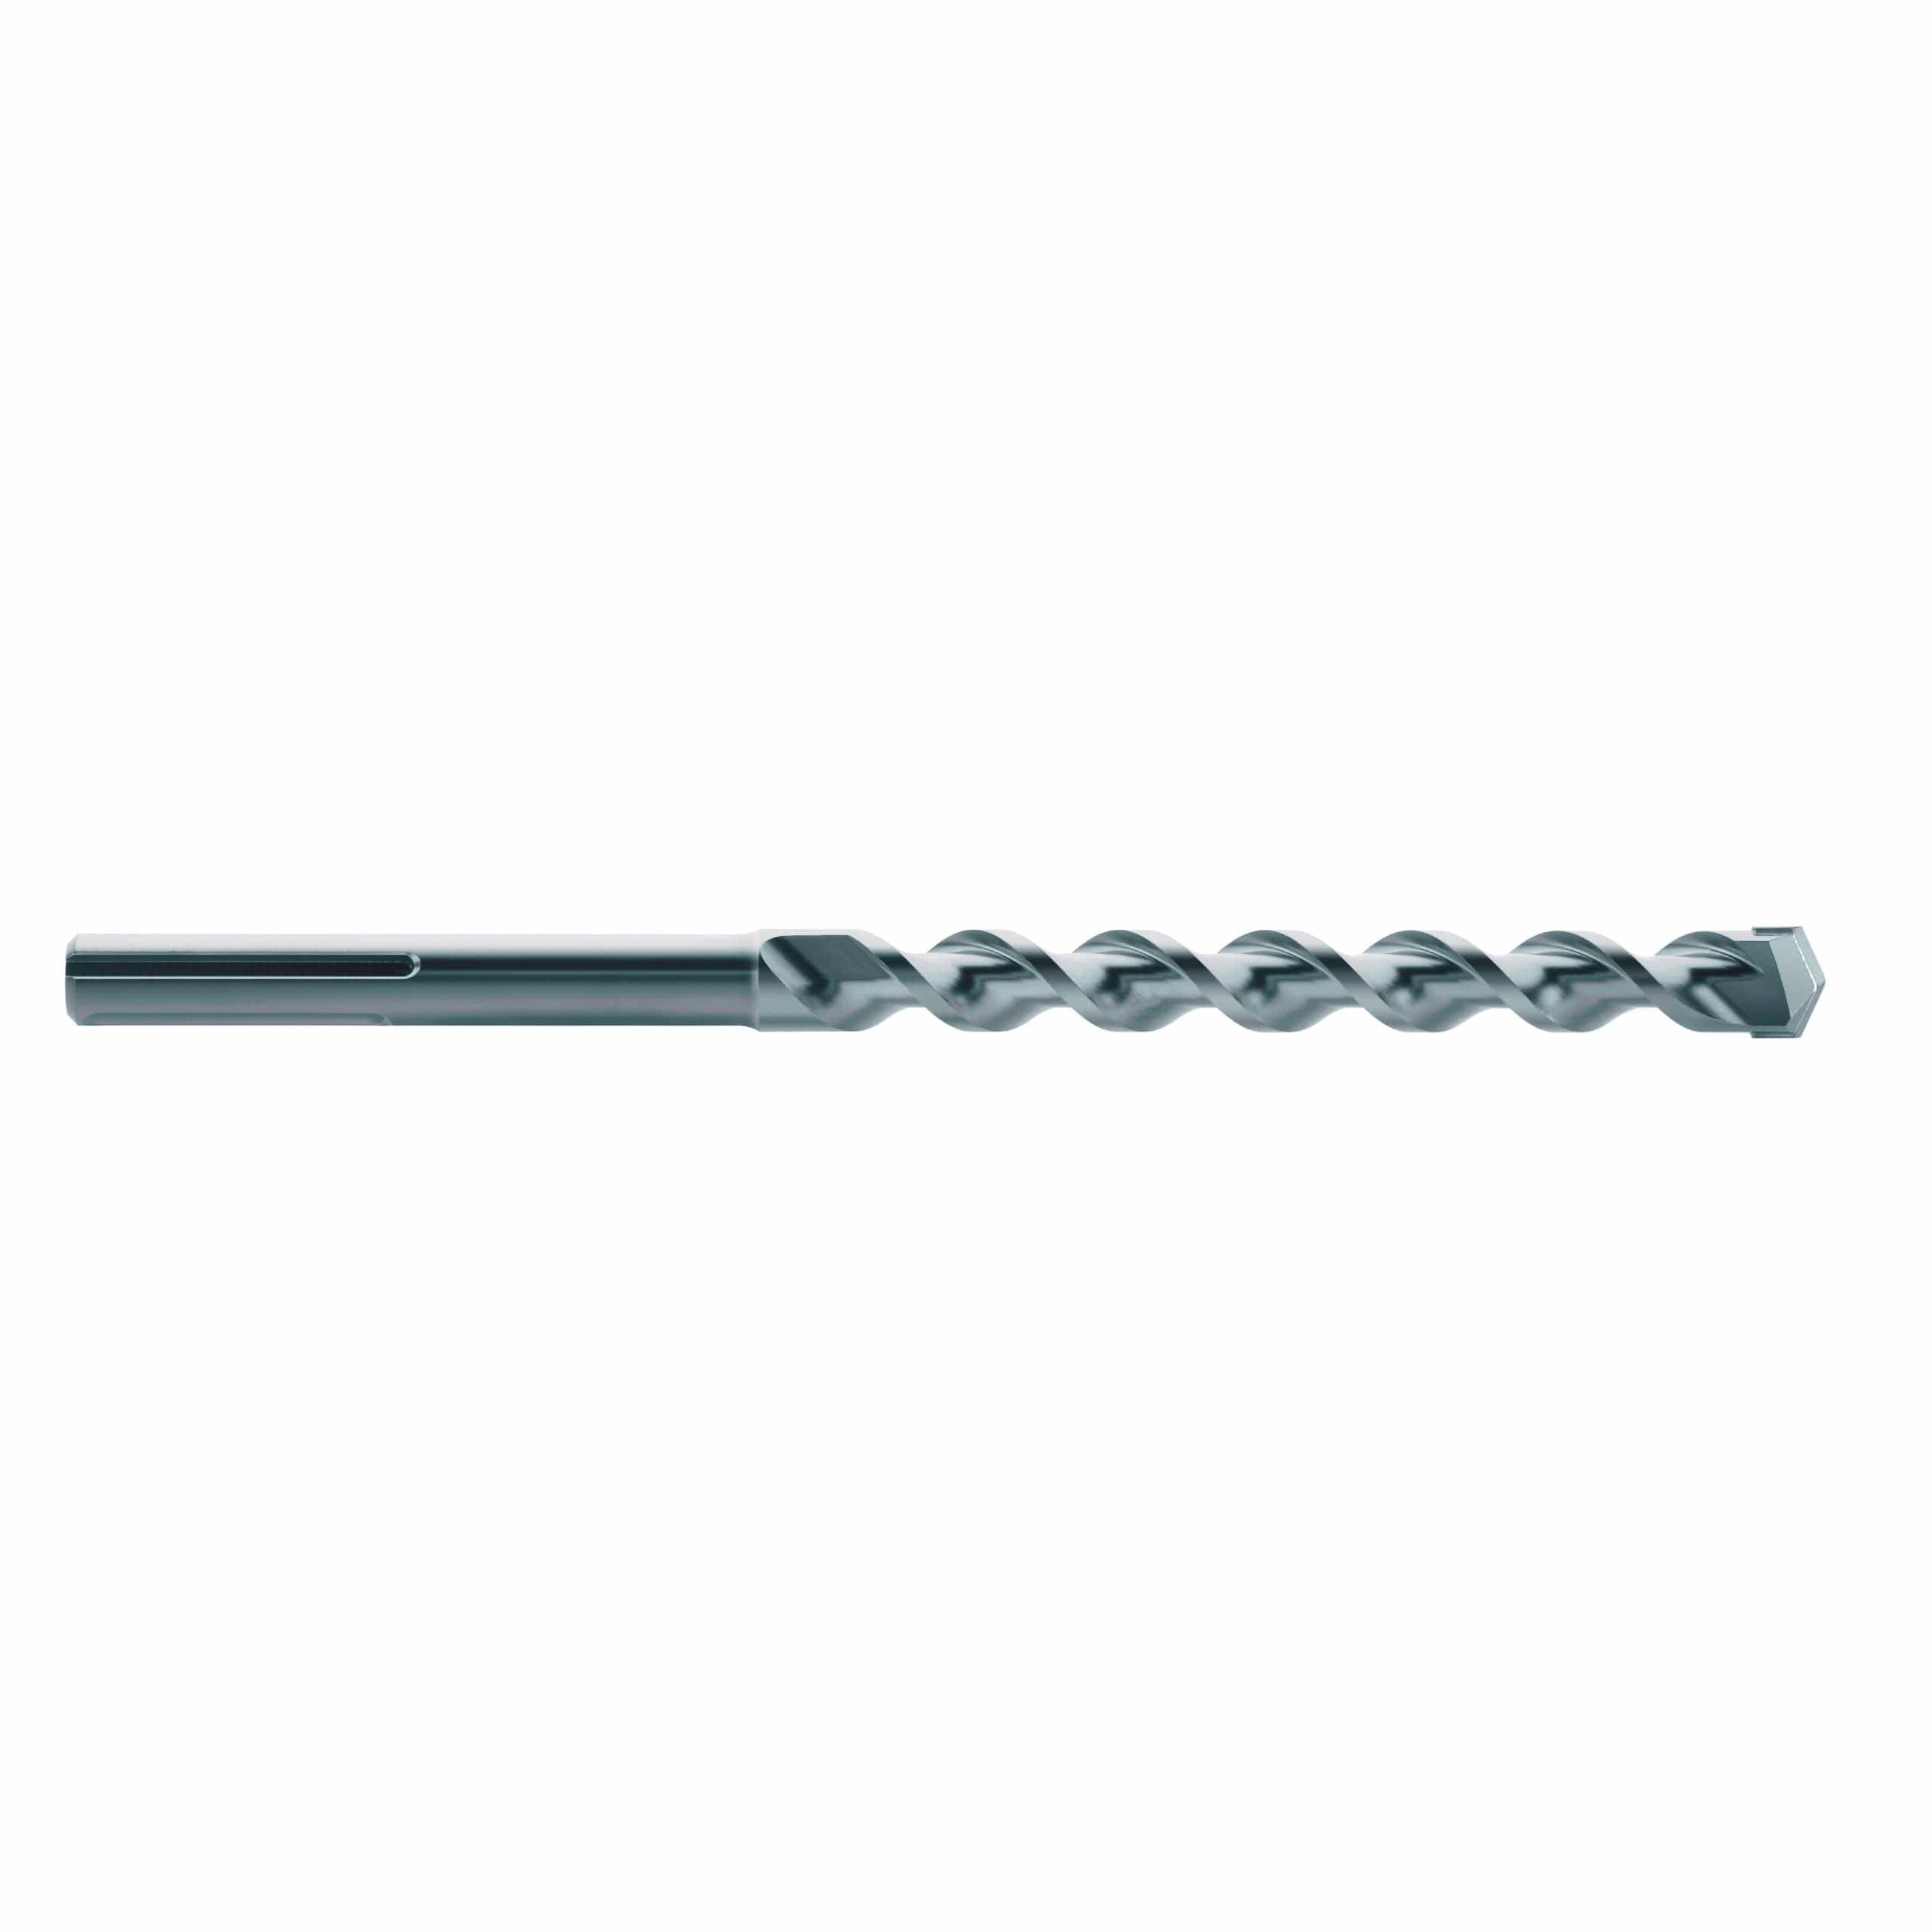 Ford SDS-Plus Drill Bit | Supply Master | Accra, Ghana Drill Bits Buy Tools hardware Building materials